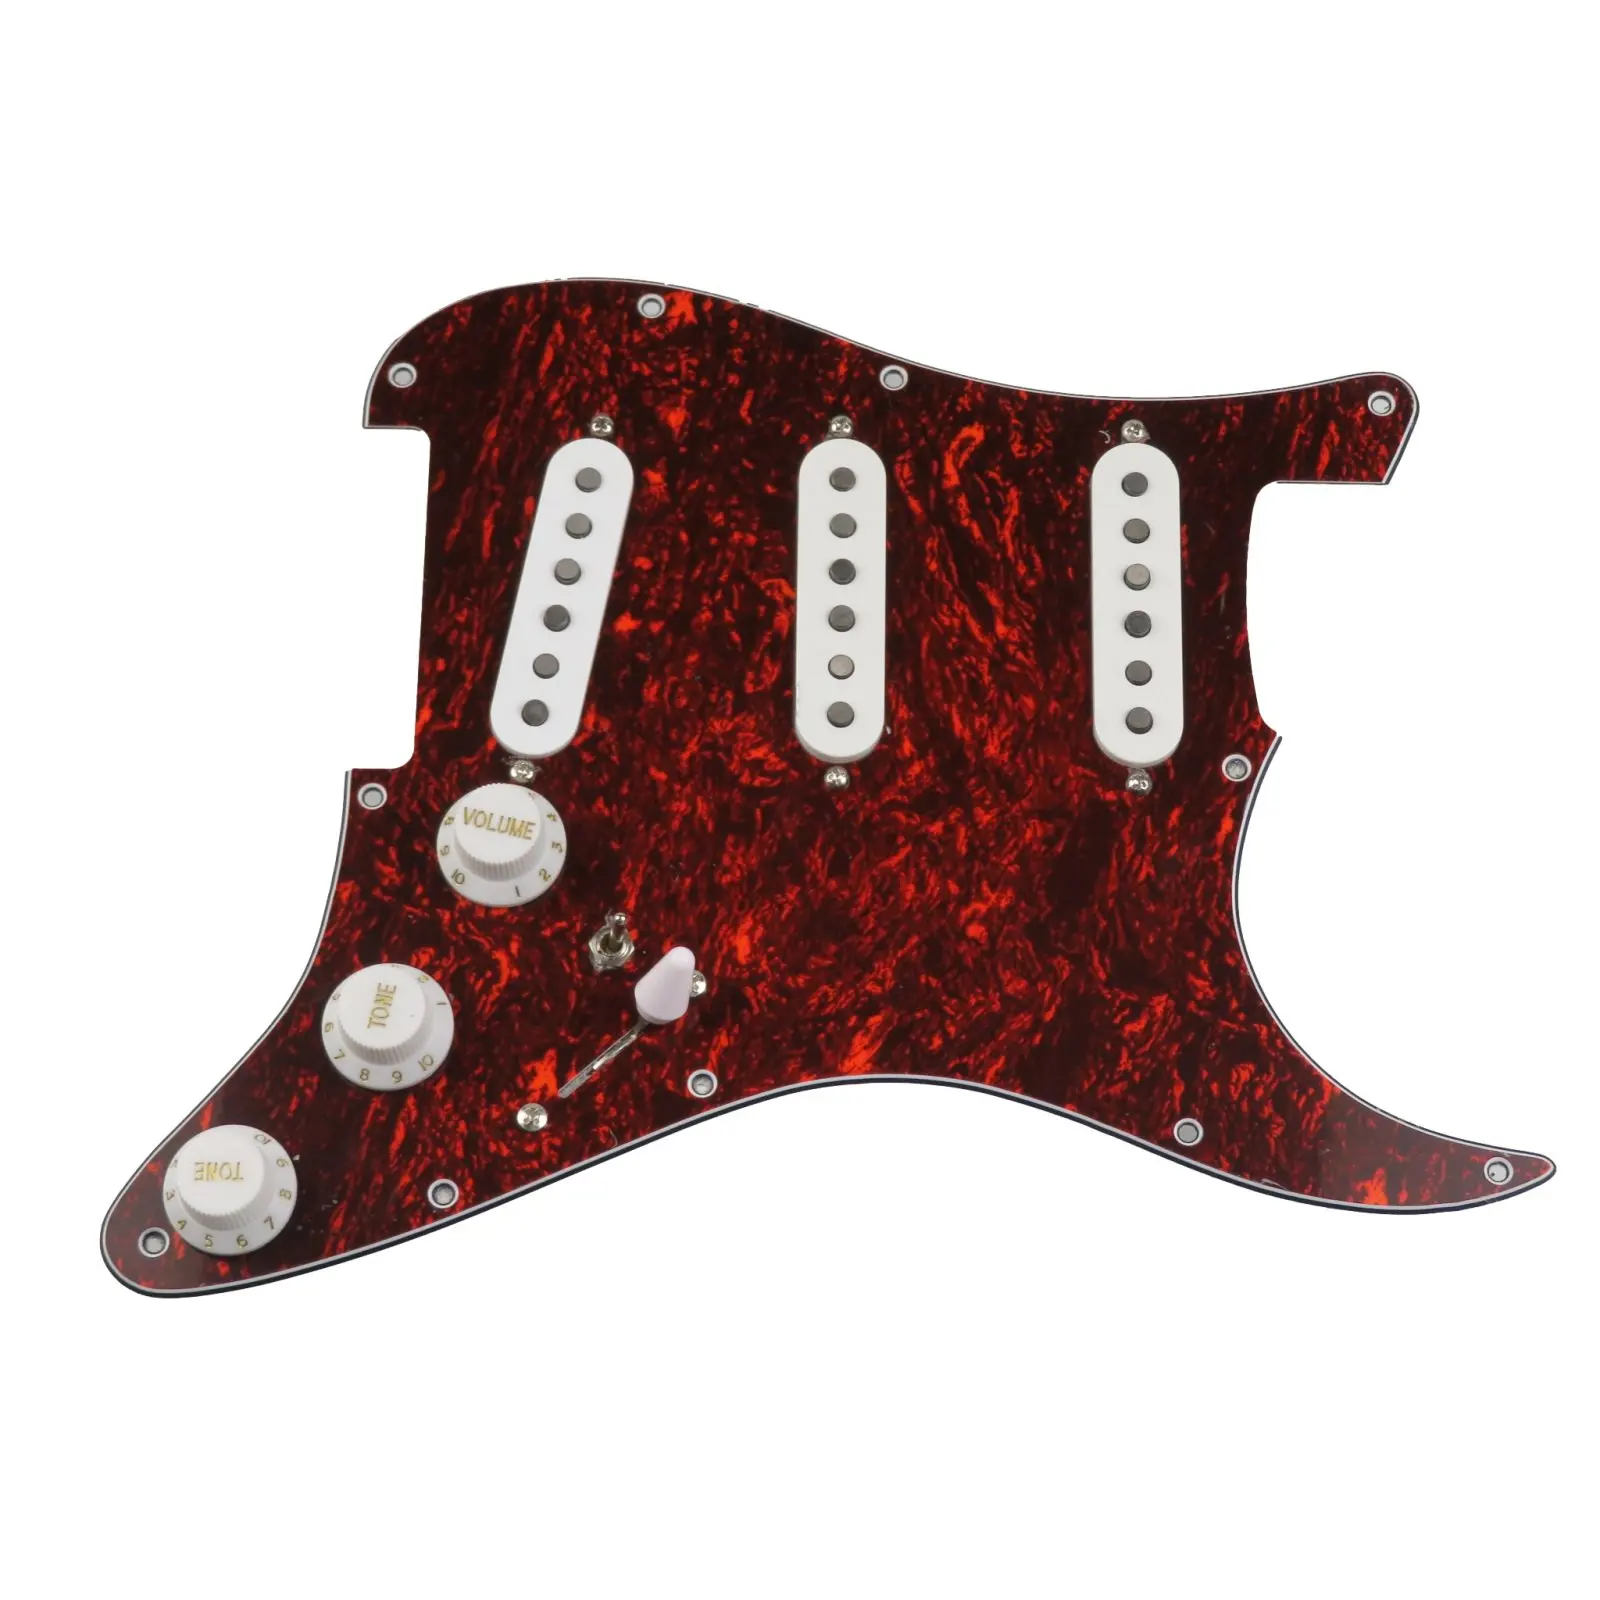 

Upgrade Loaded SSS Guitar Pickguard Set Multifunction Switch Alnico 5 Pickups 7 Way Swtich for Fender ST Guitar Welding Harness